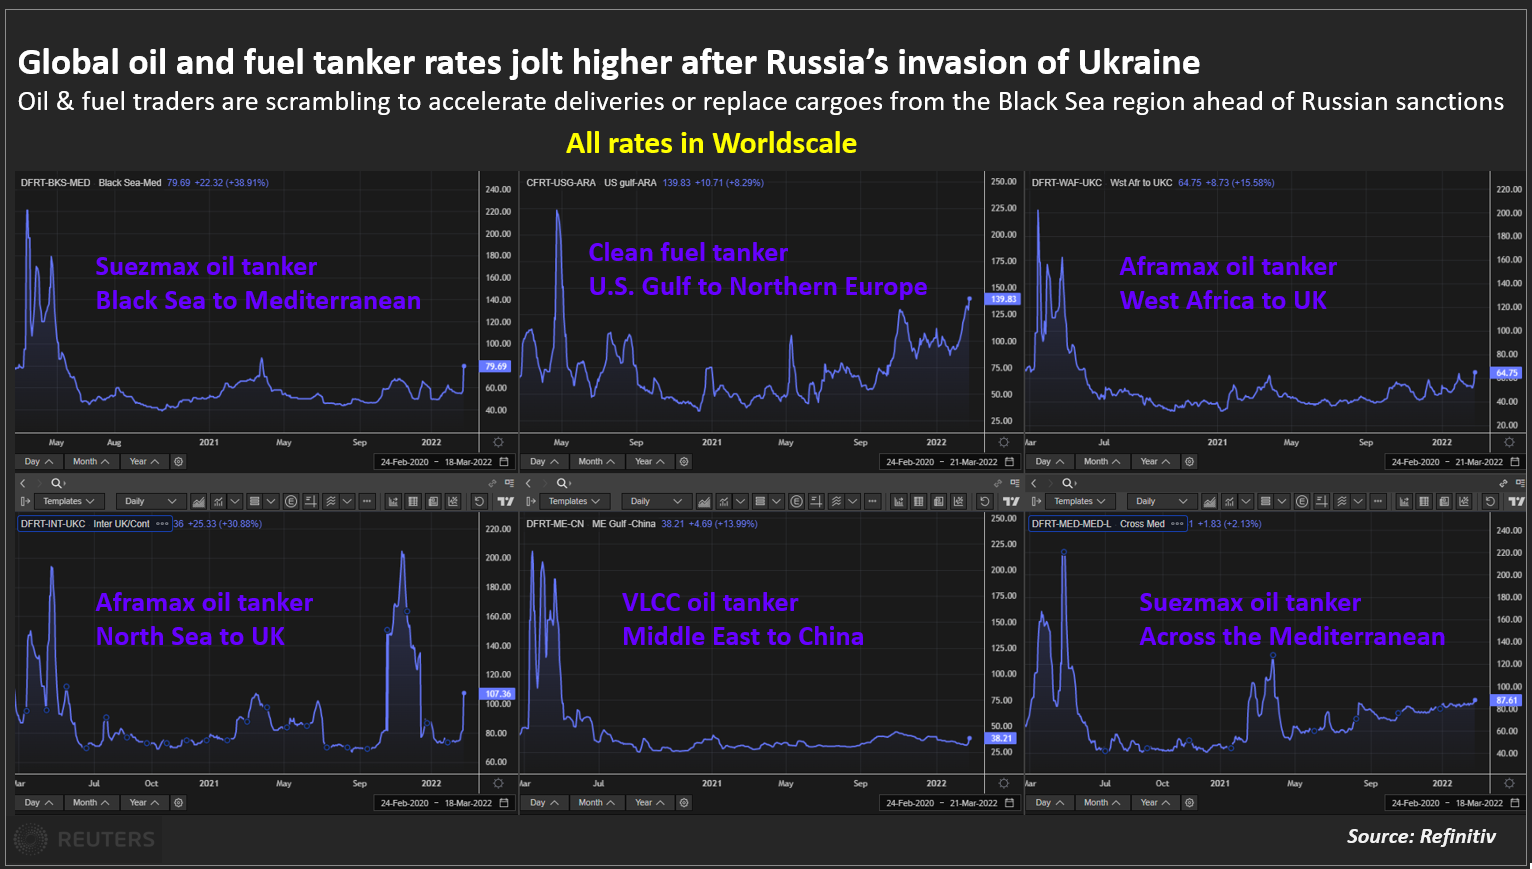 Global oil and fuel tanker rates jolt higher after Russia’s invasion of Ukraine